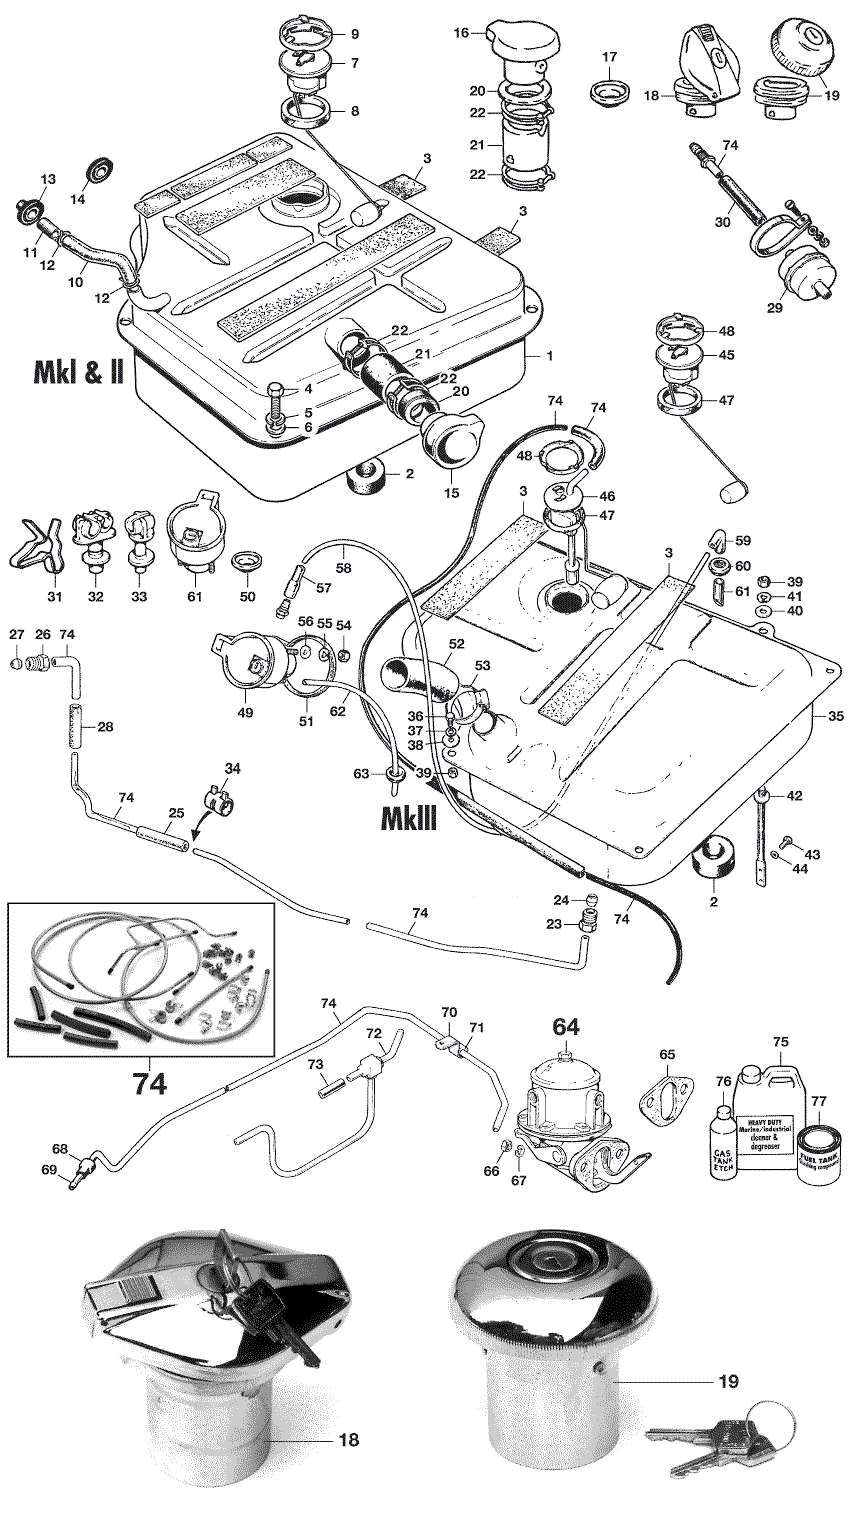 Triumph GT6 MKI-III 1966-1973 - Fuel caps and covers - Fuel system - 1